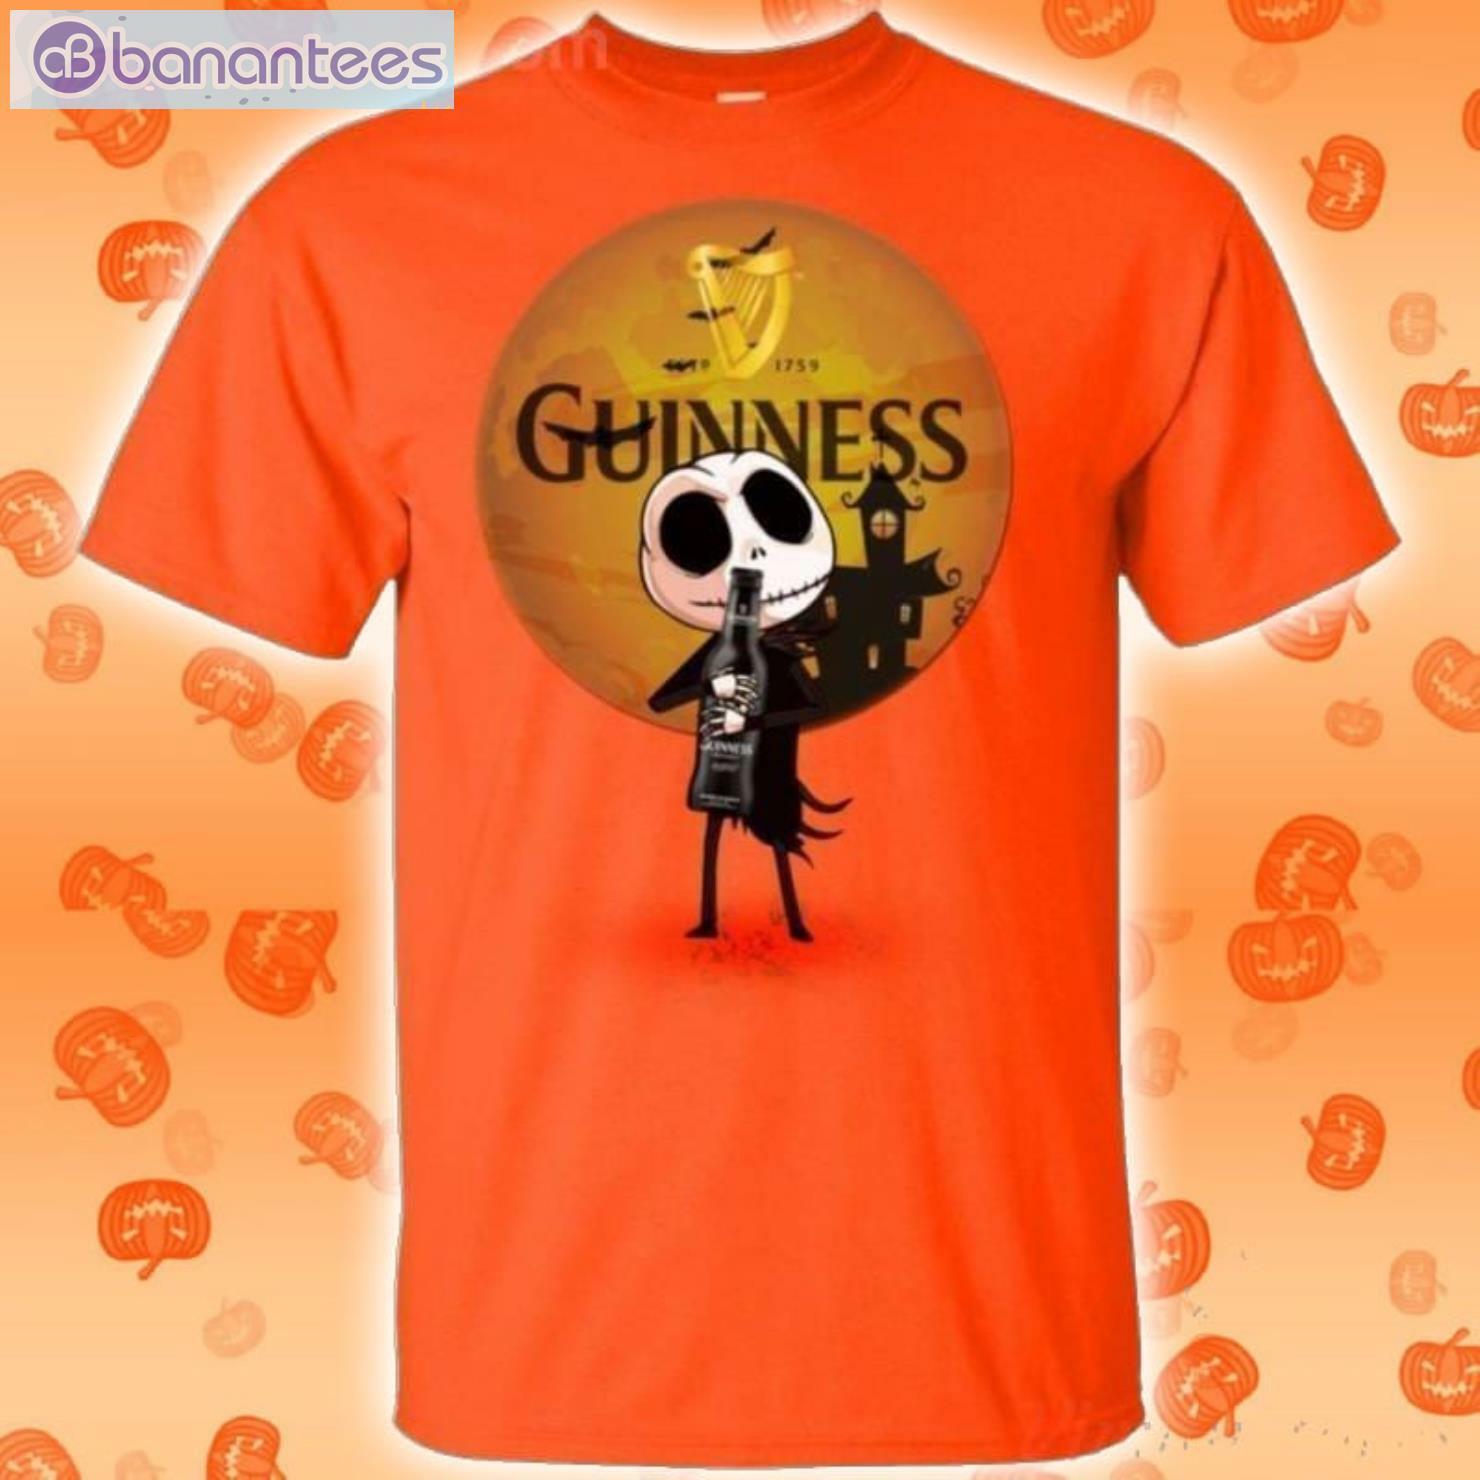 Jack Skellington Hold Guinness Beer Halloween T-Shirt Product Photo 2 Product photo 2